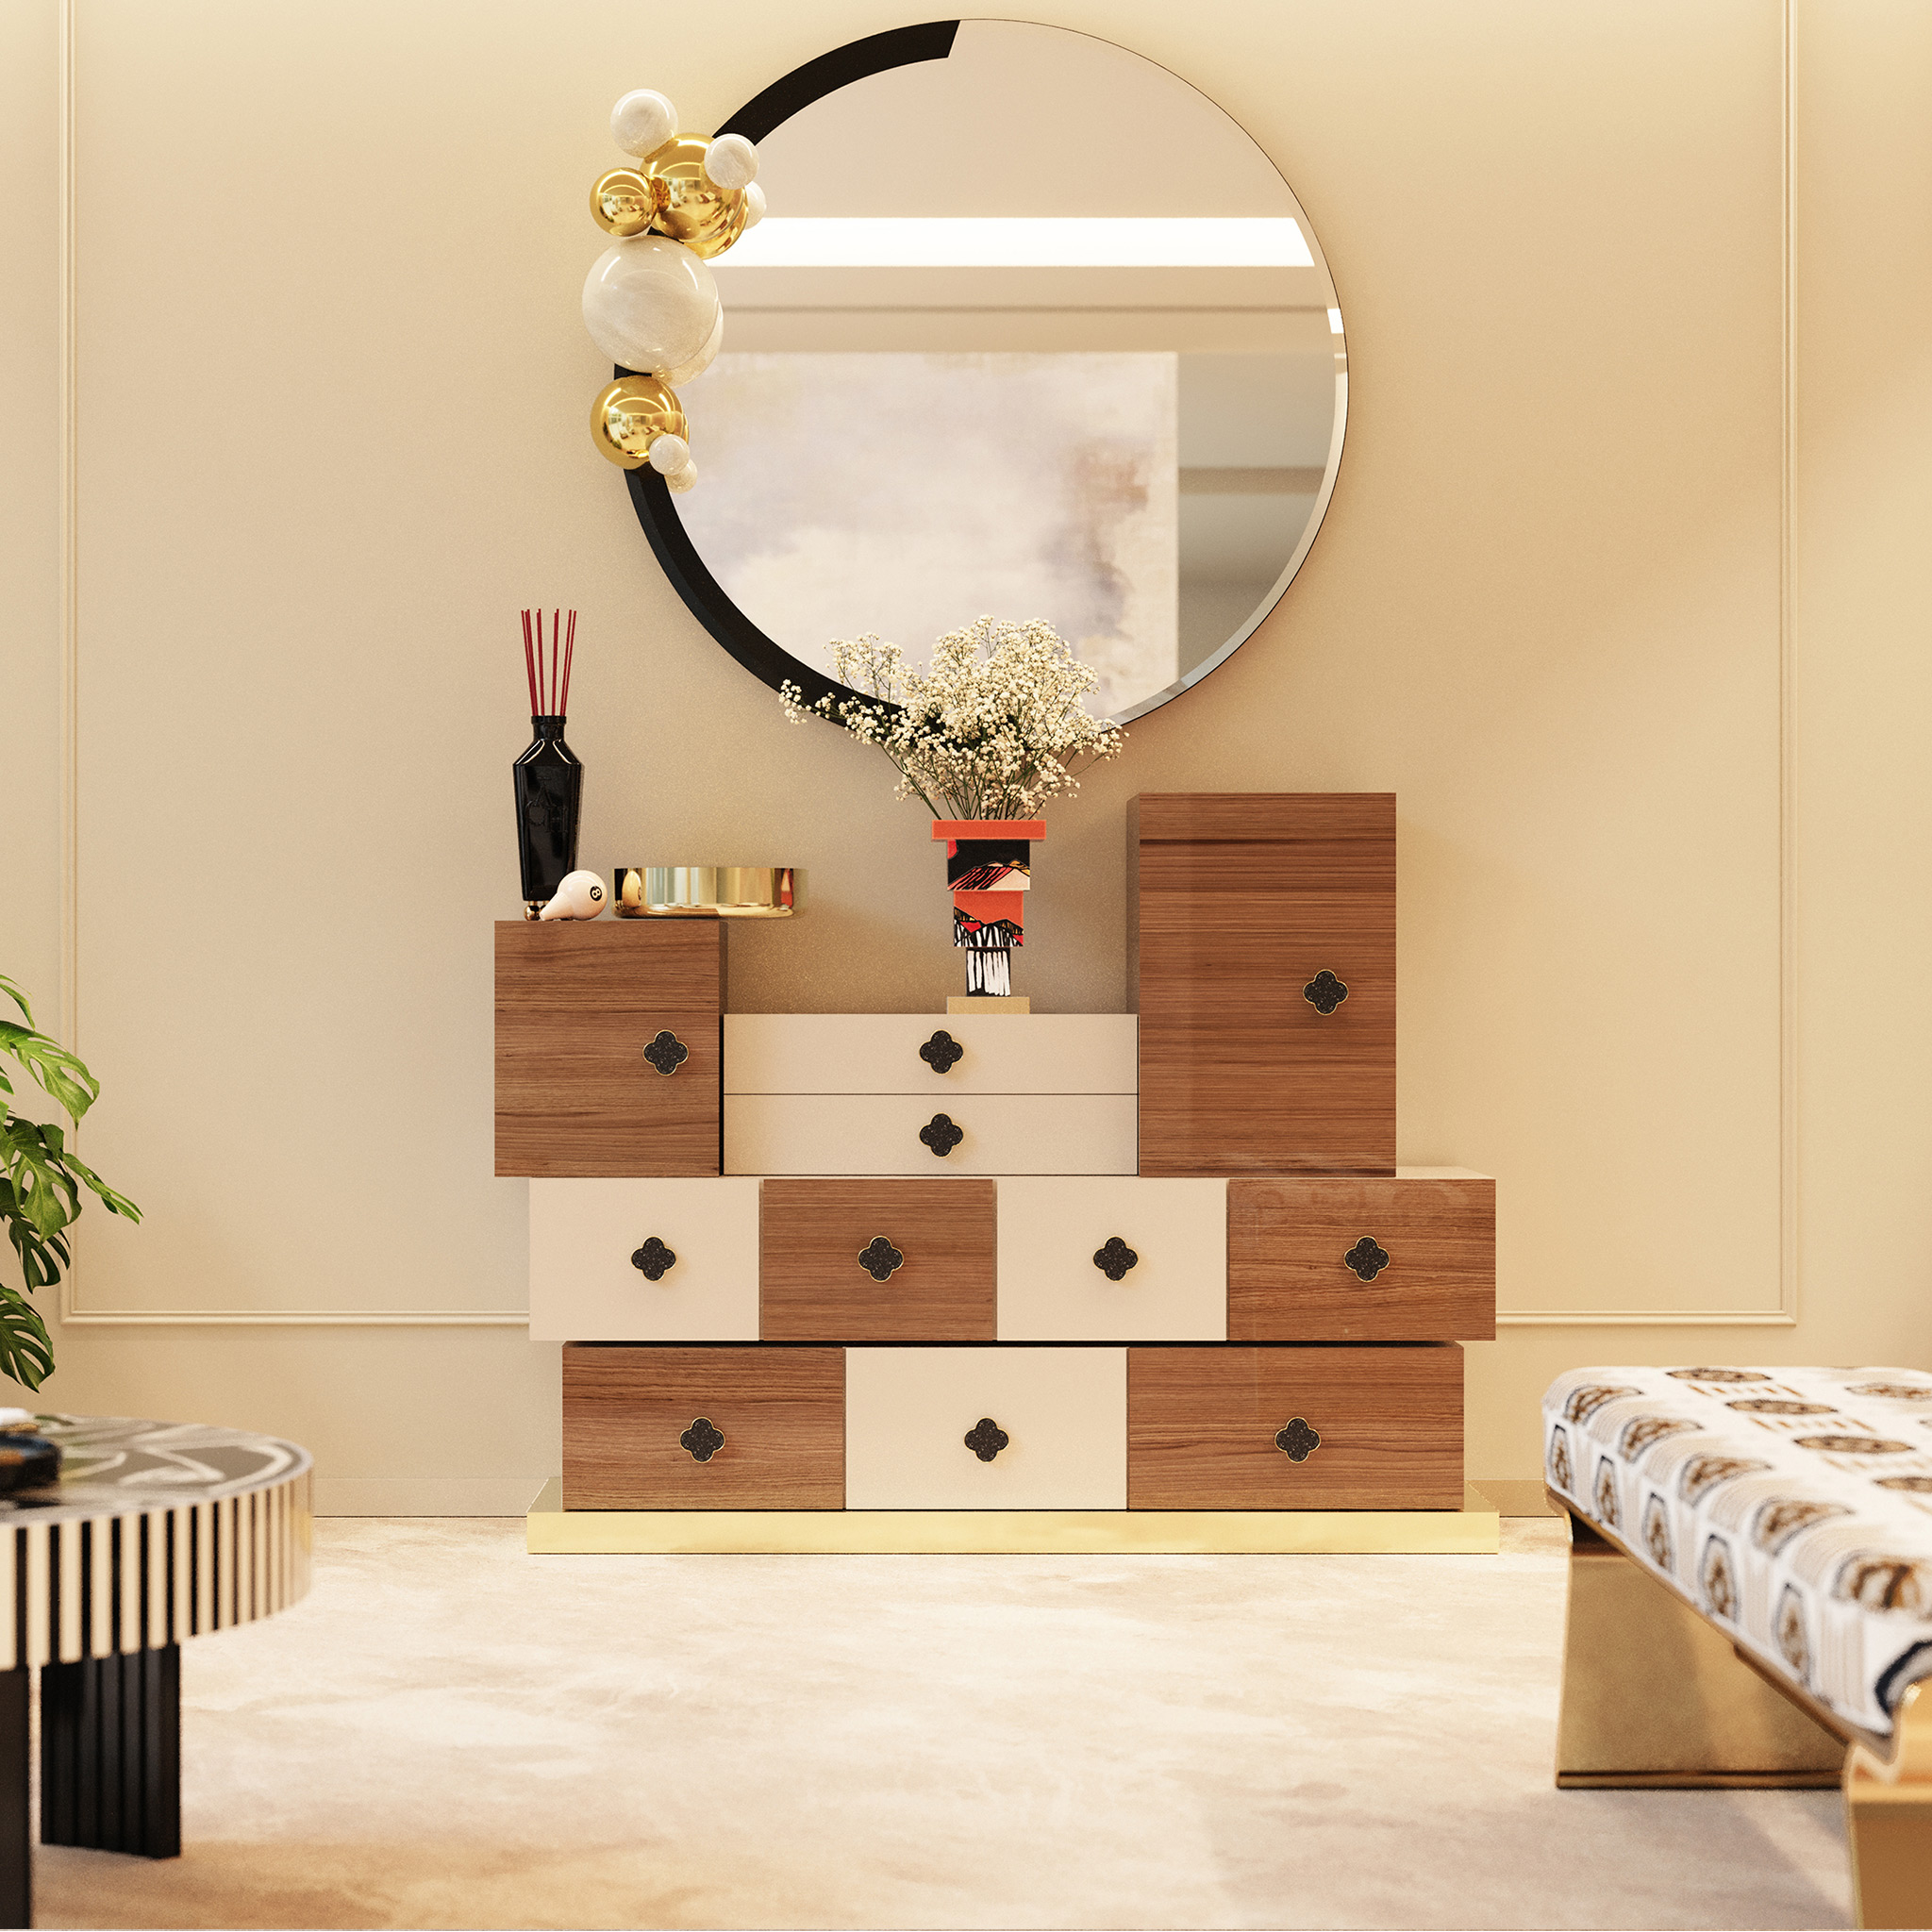 modern style furniture: malala chest of drawers and titan mirror by hommés studio